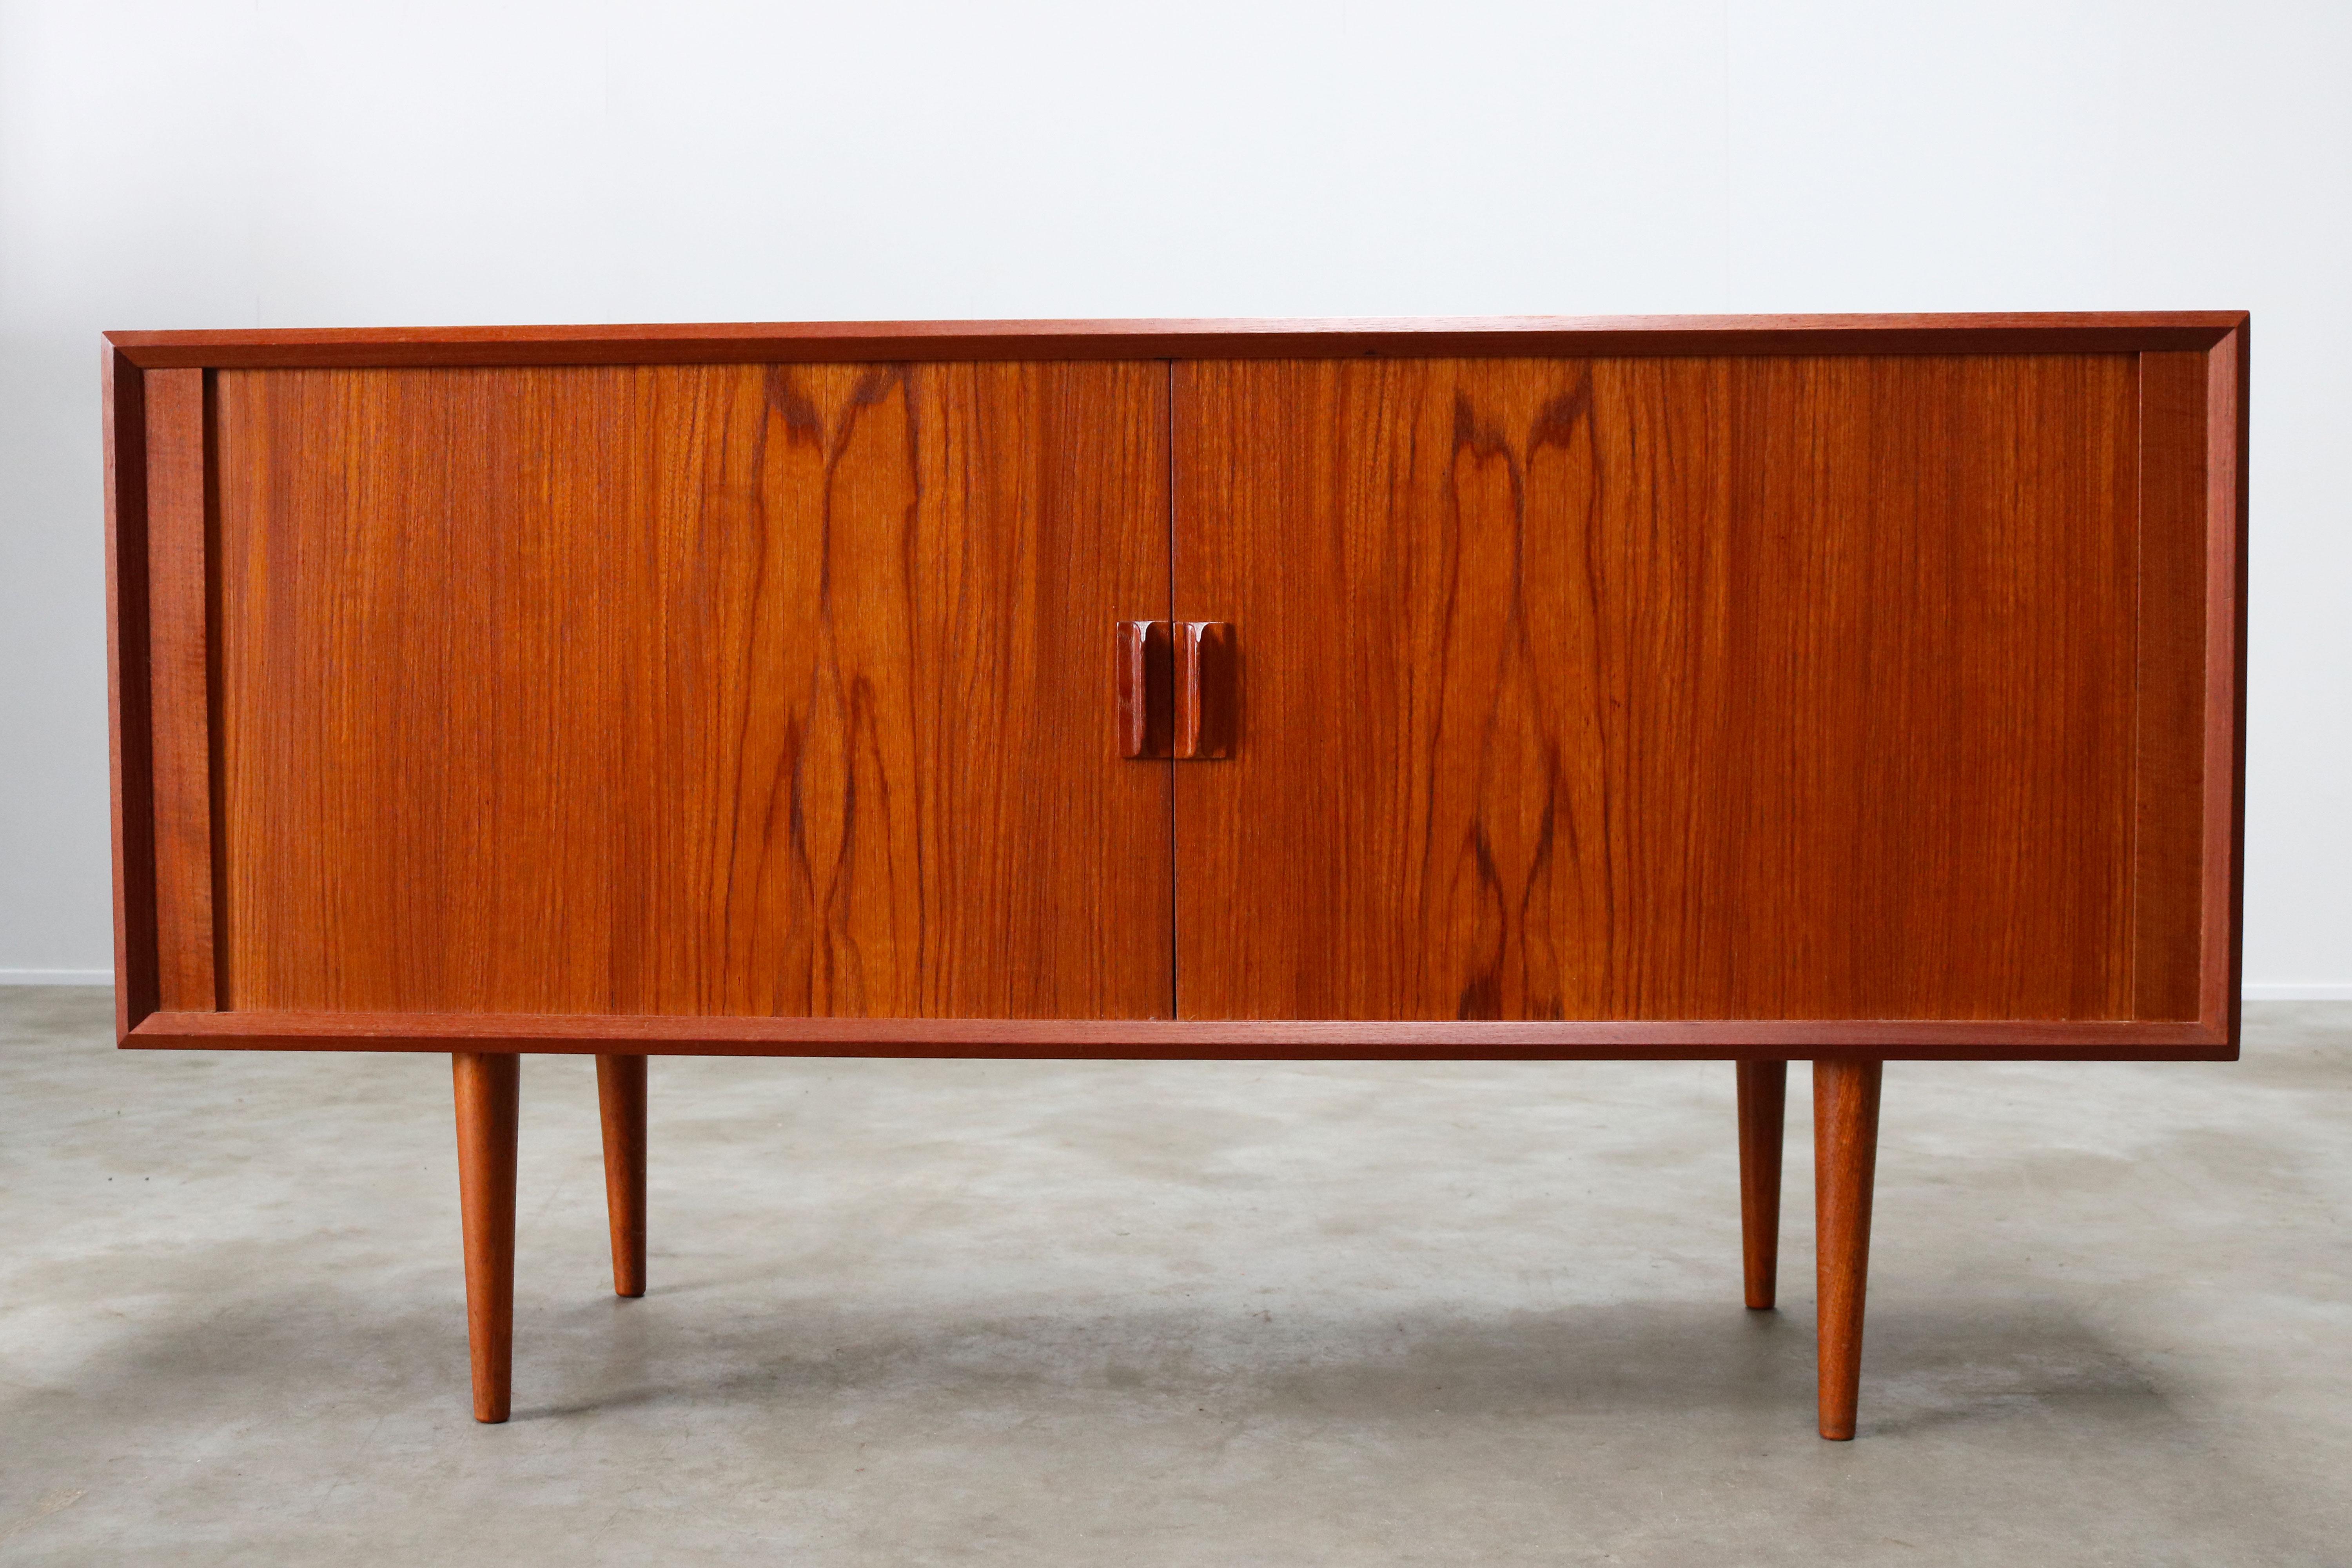 Mid-Century Modern Small Rare Danish Sideboard / Credenza by Svend Aage Madsen for Faarup 1950 Teak